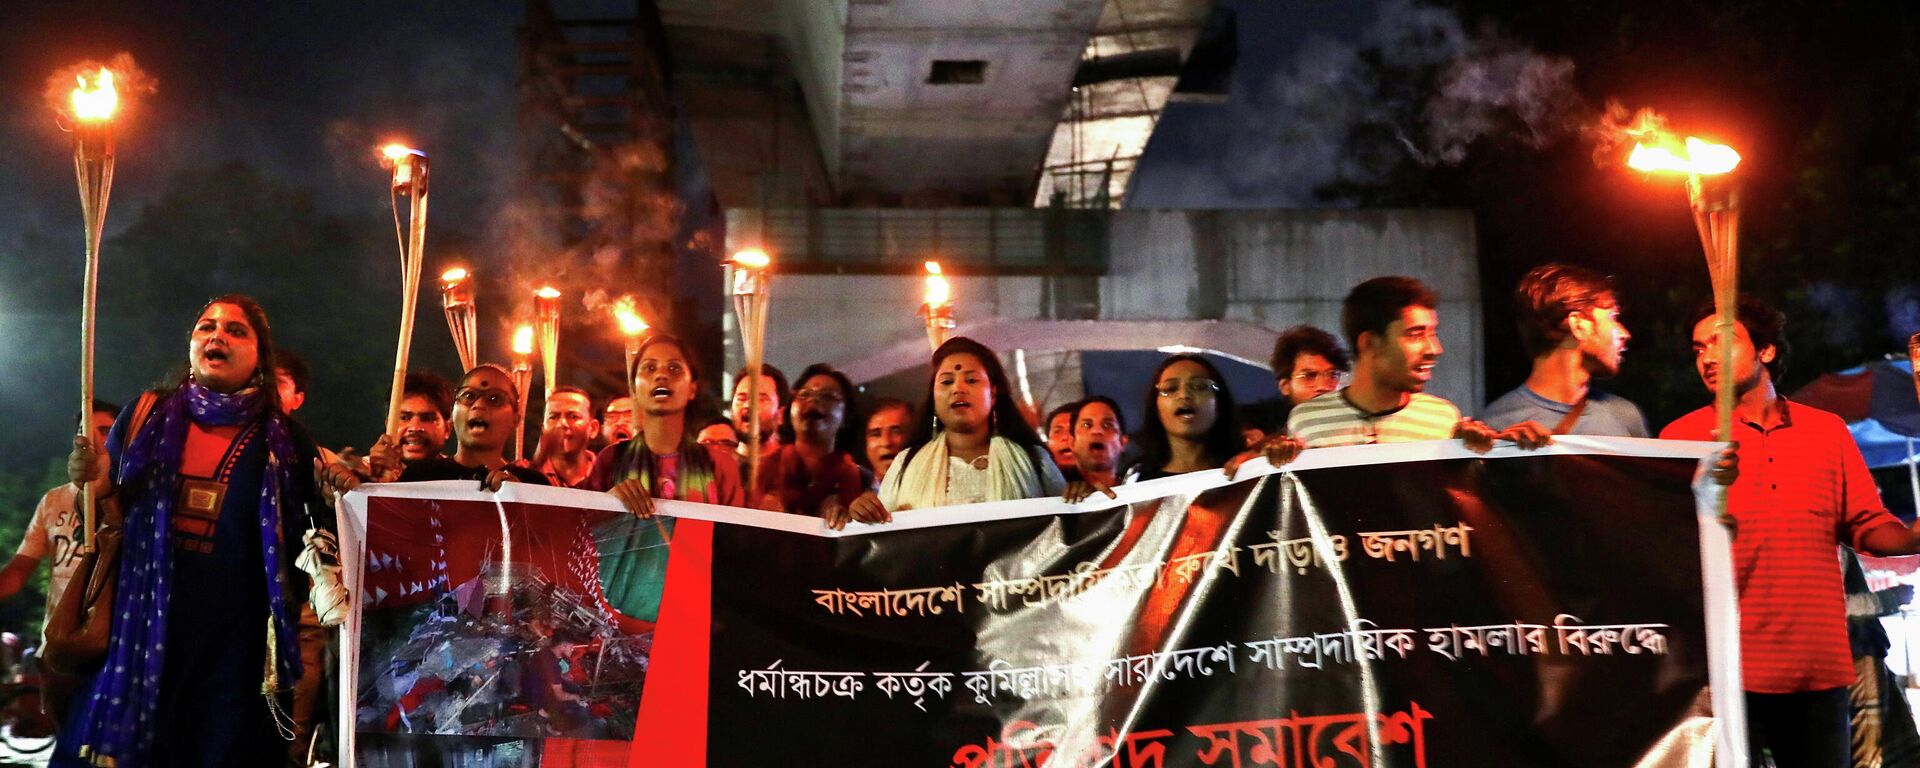 Bangladeshi activists join in a torch procession demanding justice for the violence against Hindu communities during Durga Puja festival in Dhaka, Bangladesh, October 18, 2021 - Sputnik International, 1920, 20.10.2021